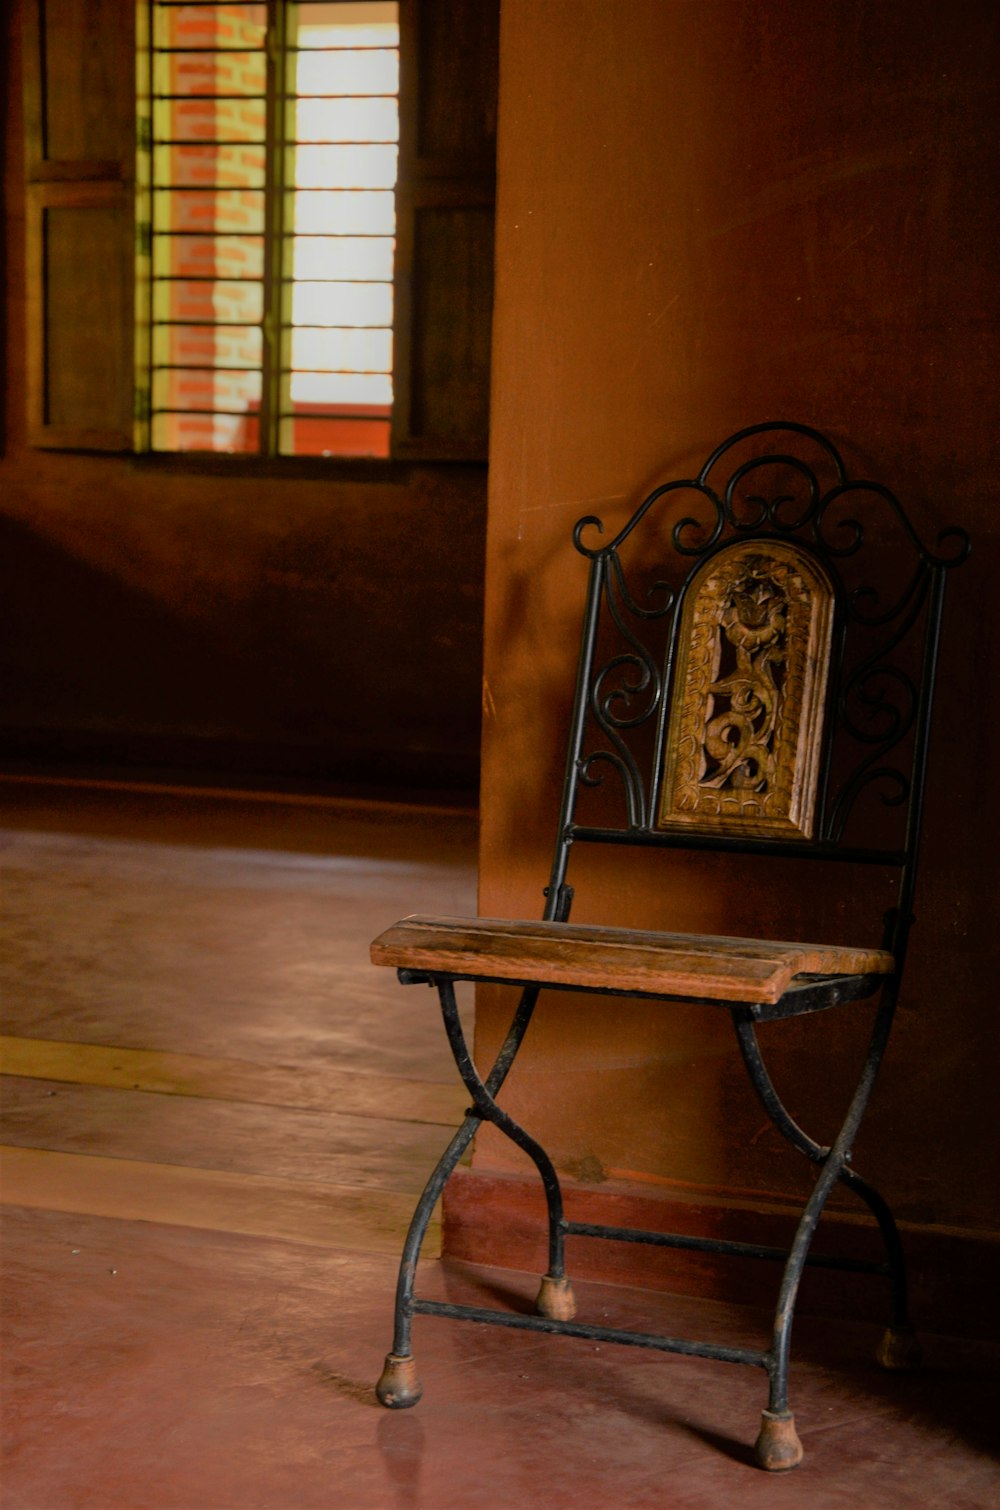 a bench sitting in a room next to a window